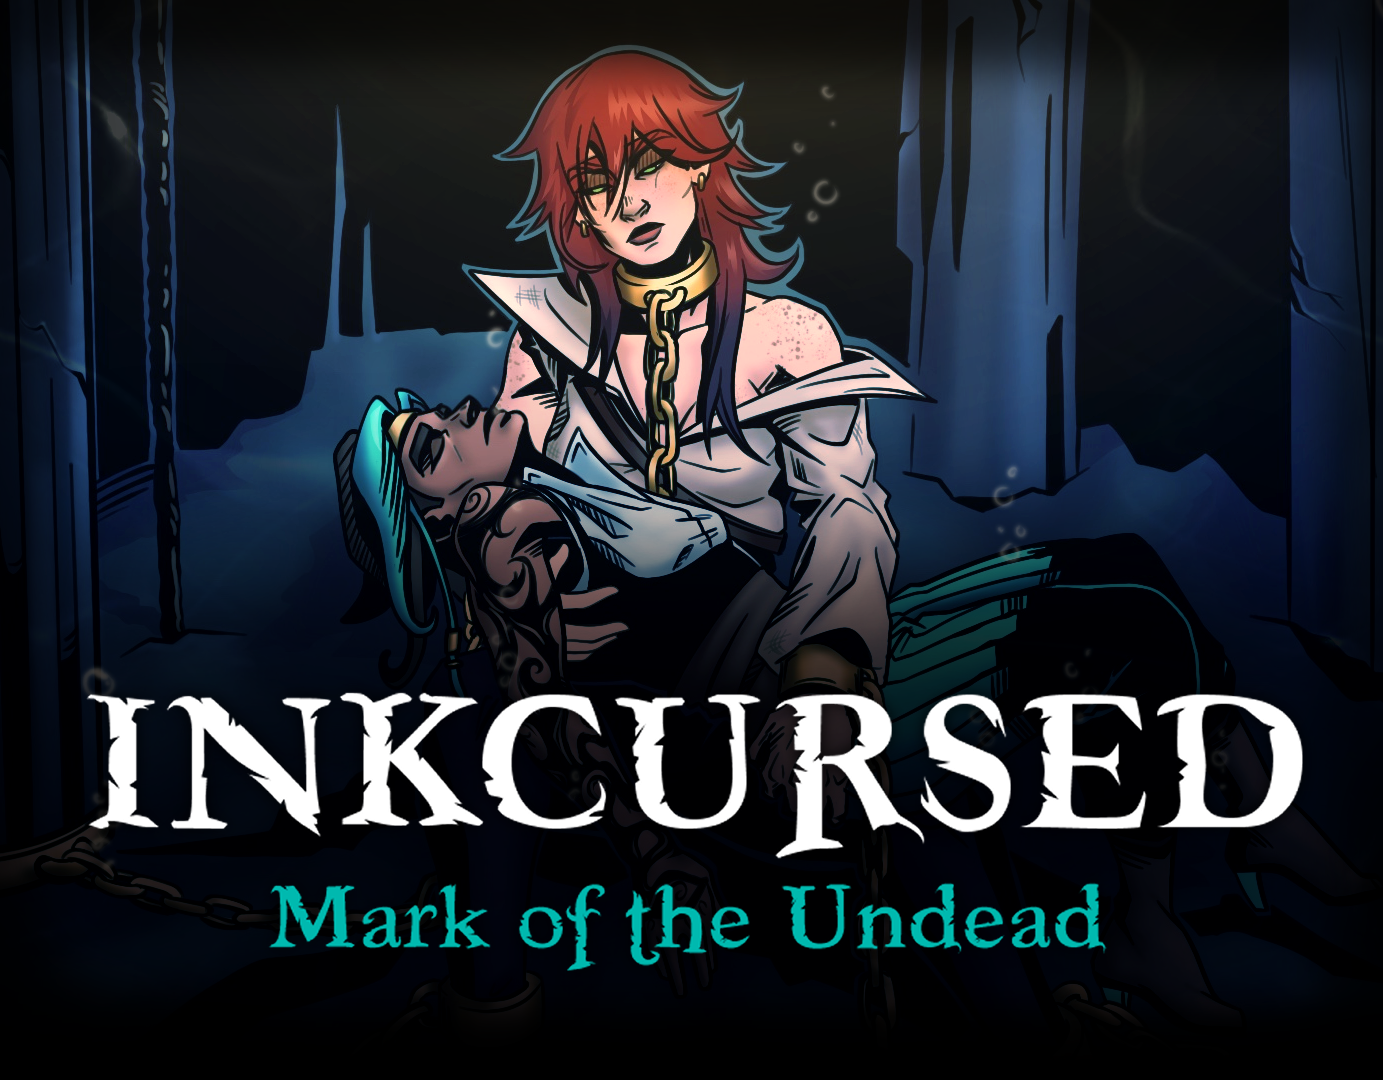 INKCURSED - Mark of the Undead